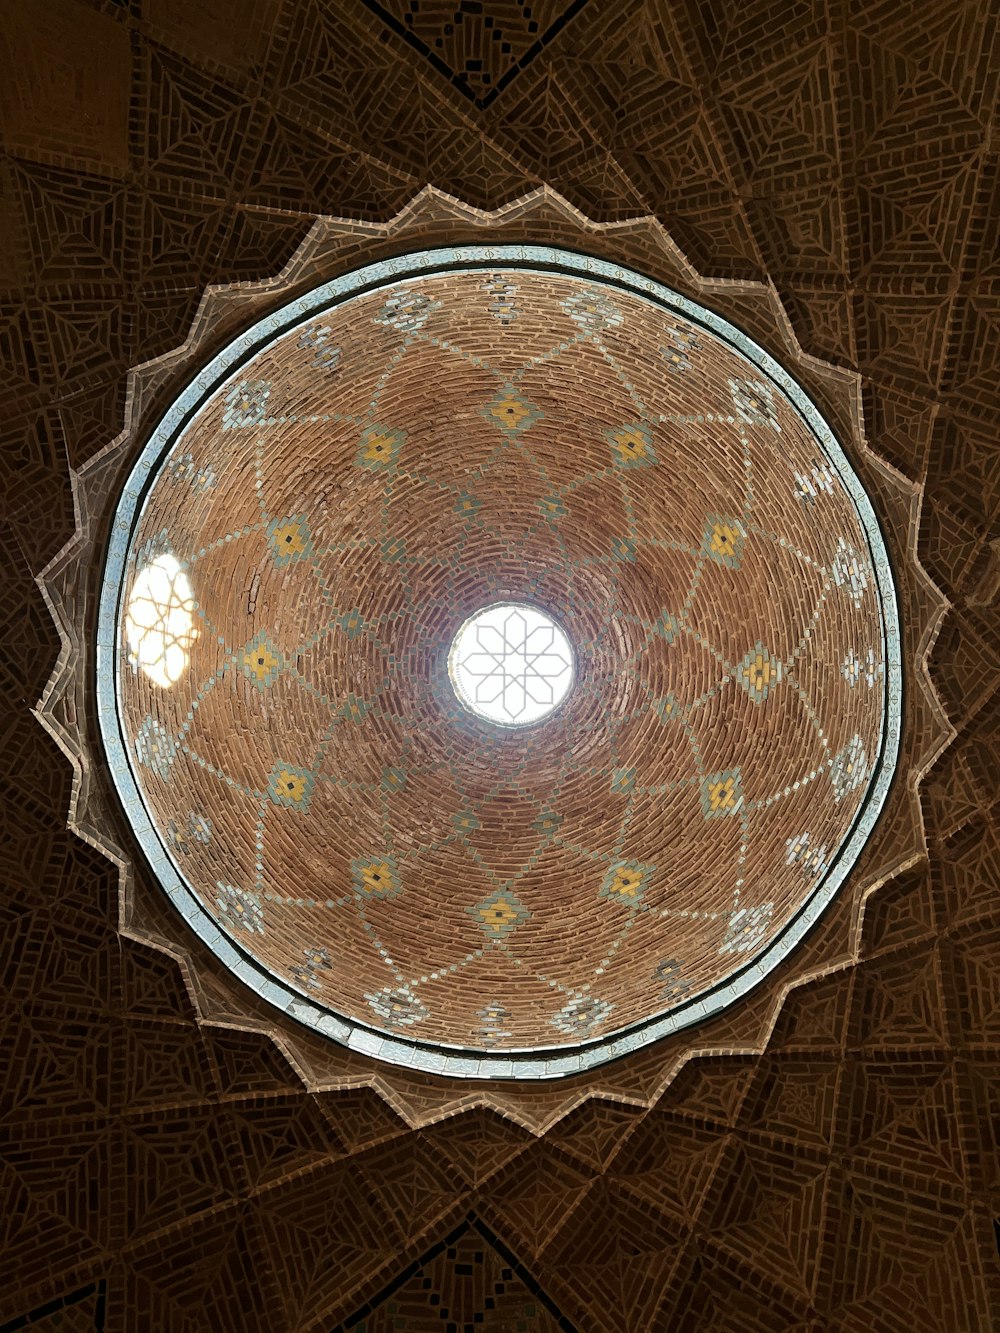 a circular ceiling with a circular window in the center